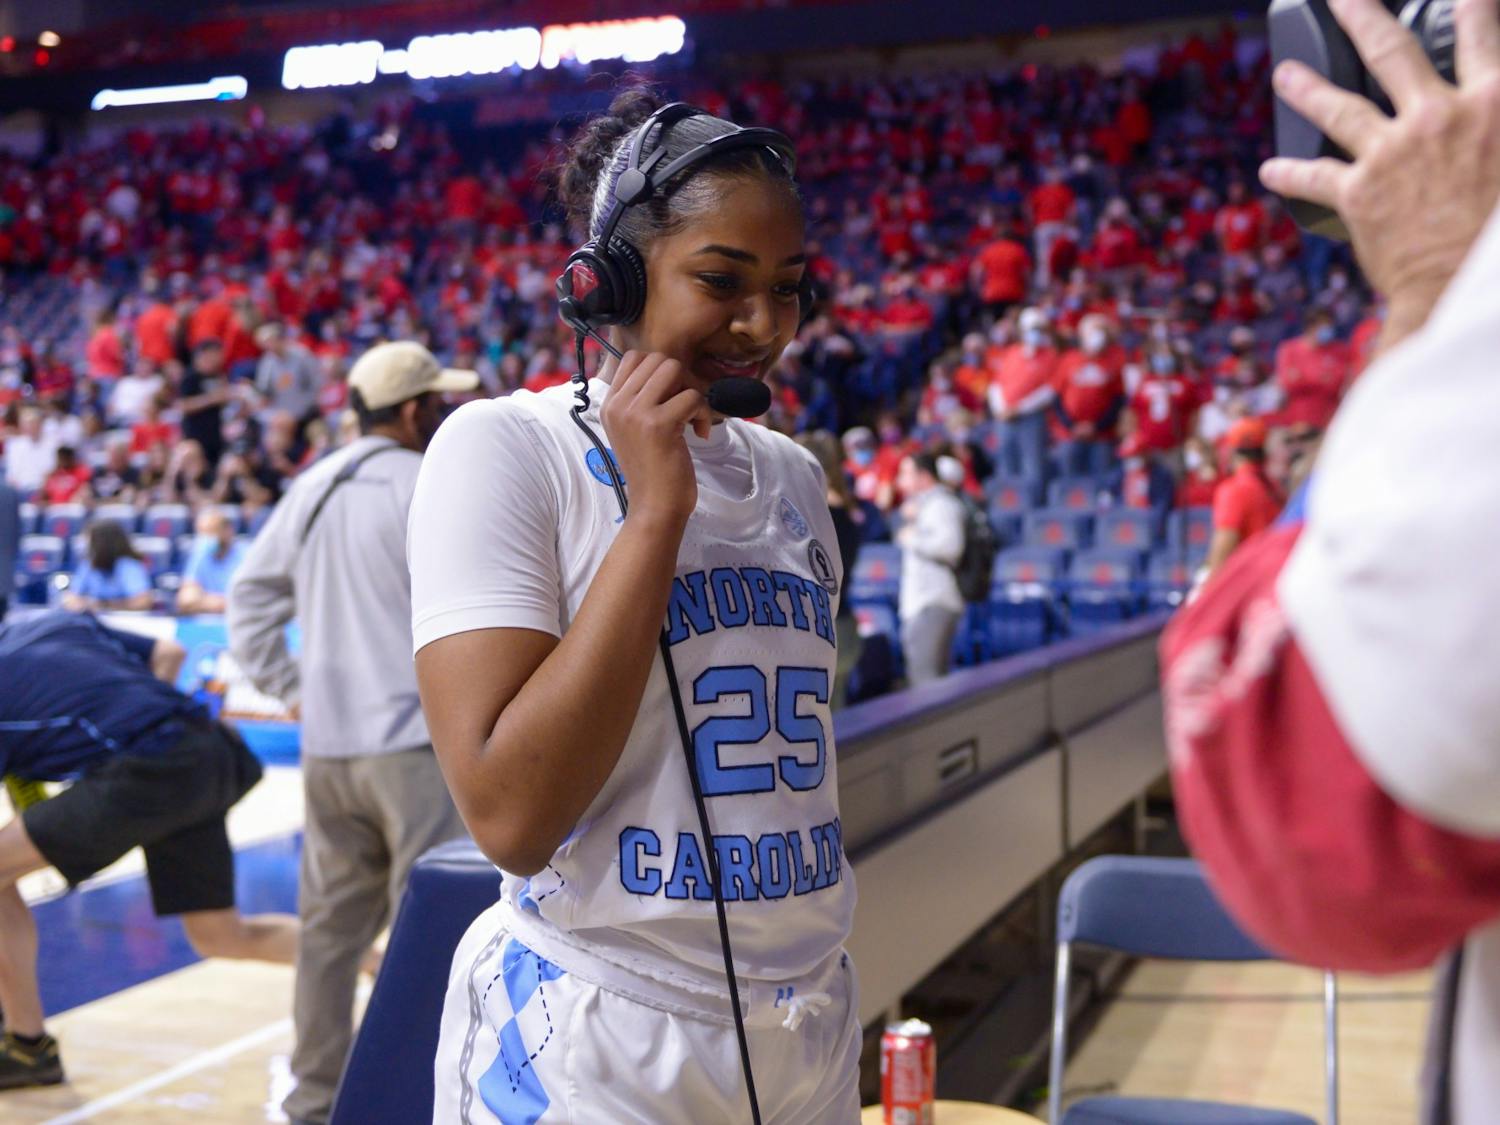 UNC sophomore guard Deja Kelly (25) speaks in an interview after a women's basketball game against Stephen F. Austin in Tucson, Arizona, on Saturday, March 19, 2022.